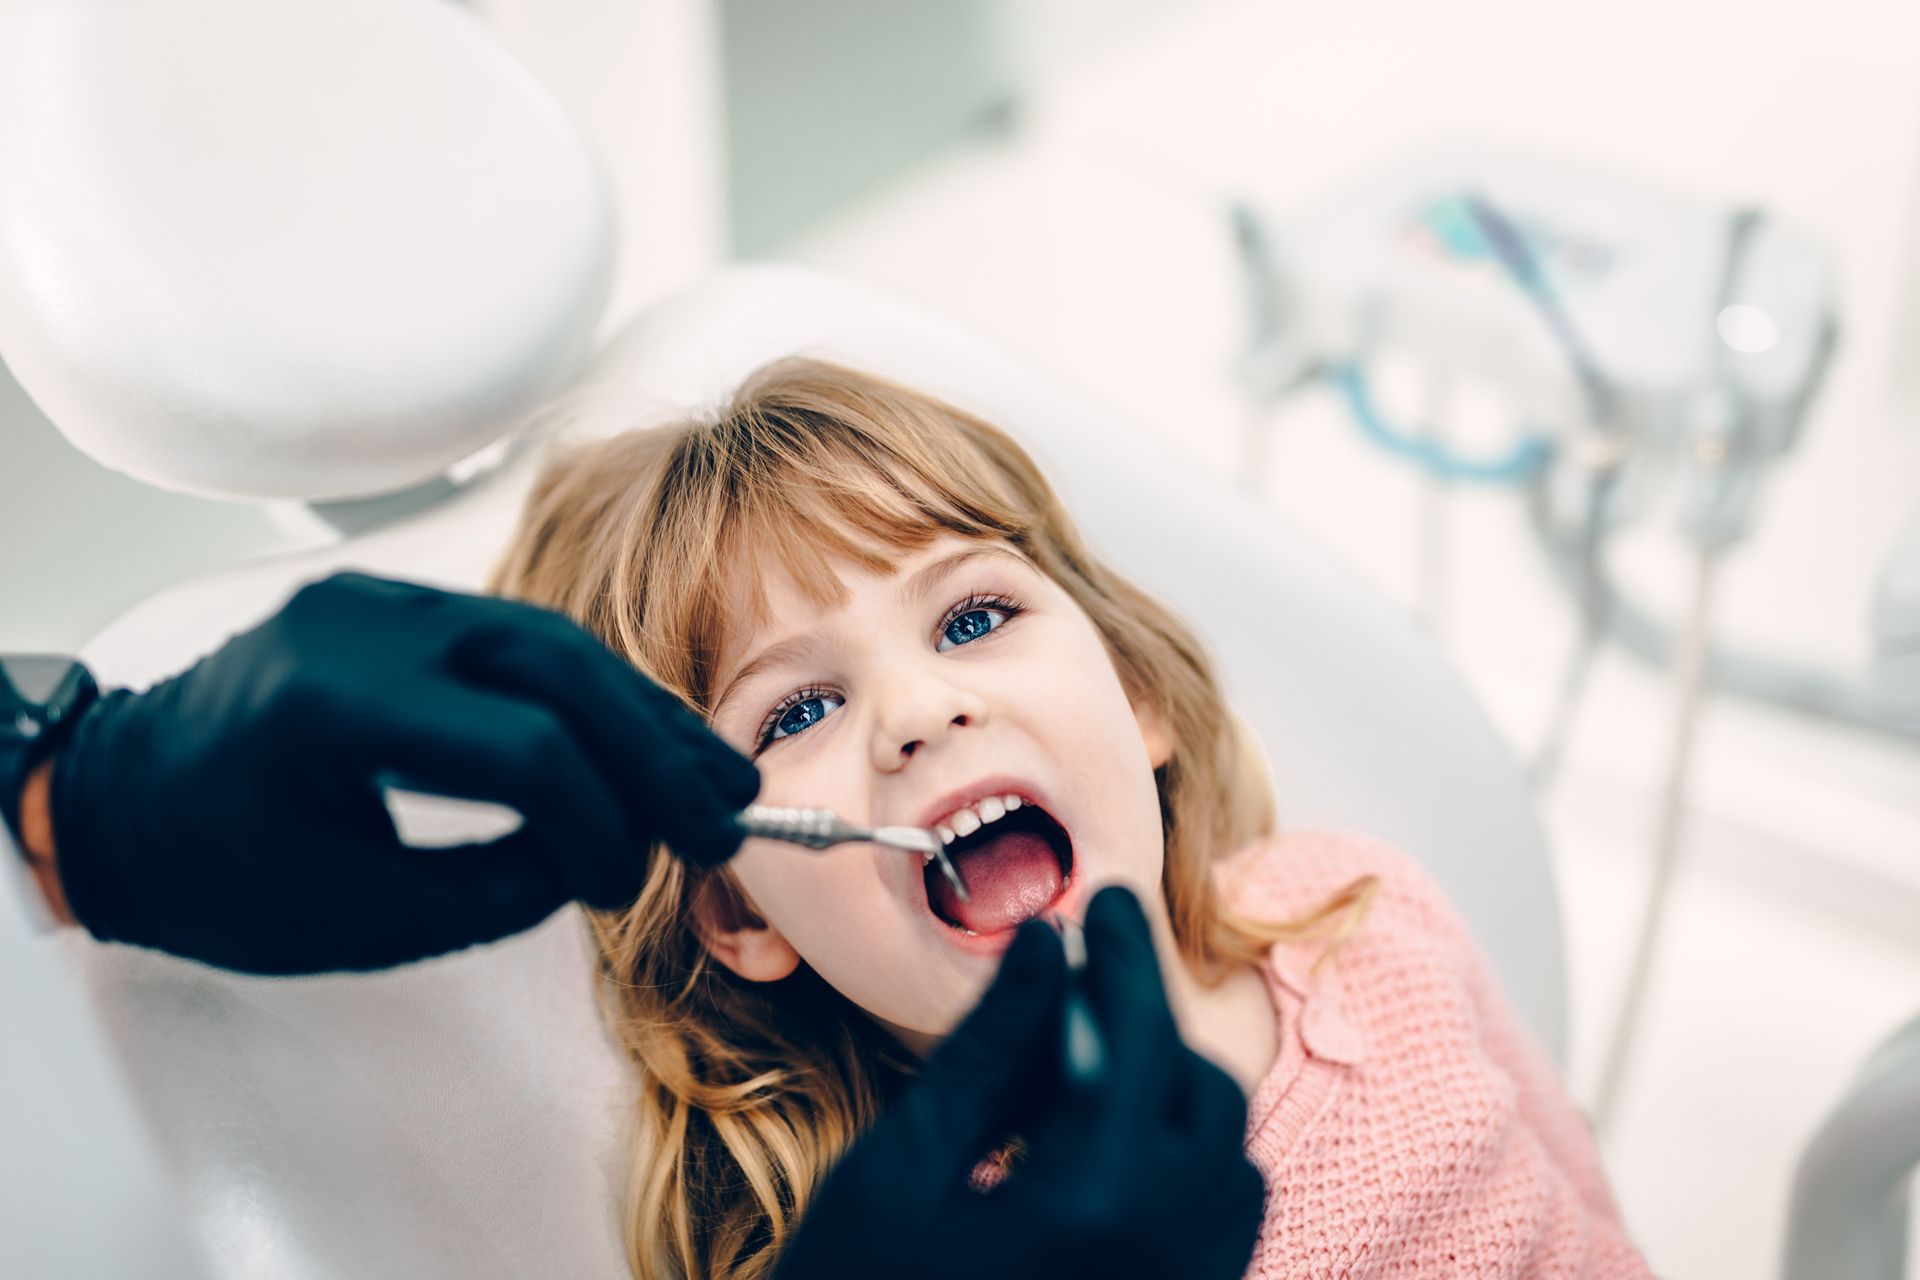 little girl smiling while sitting in dental chair look at the camera ready for her appointment